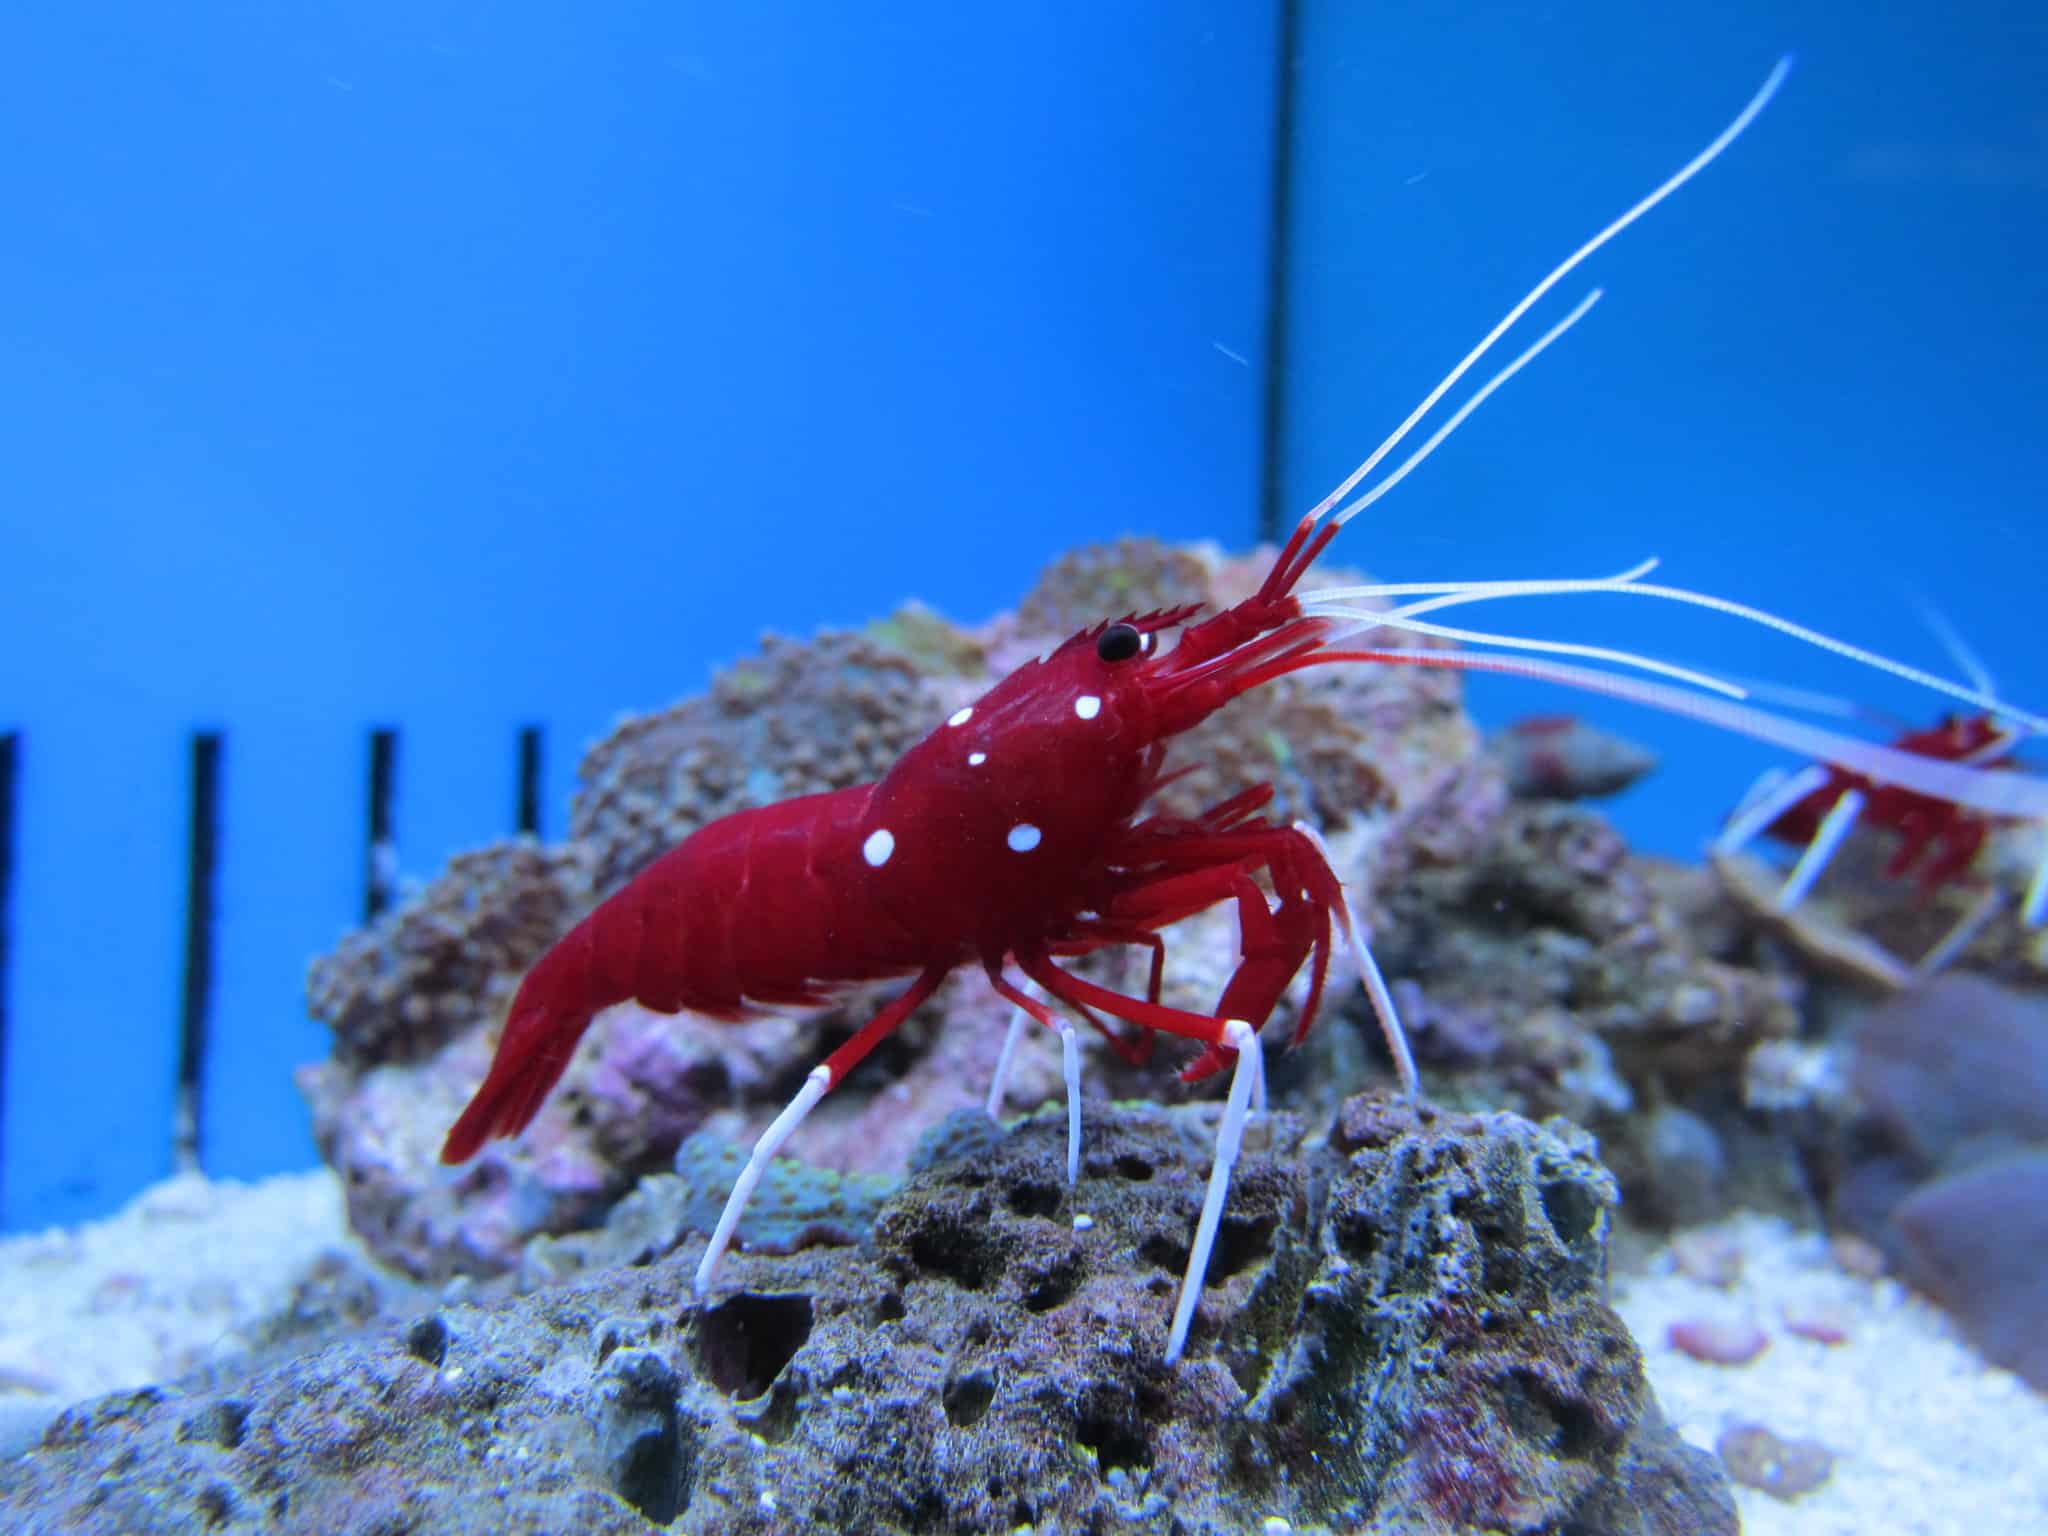 30 Pistol Shrimp Facts That Are More Harmless Than It Looks - Facts.net